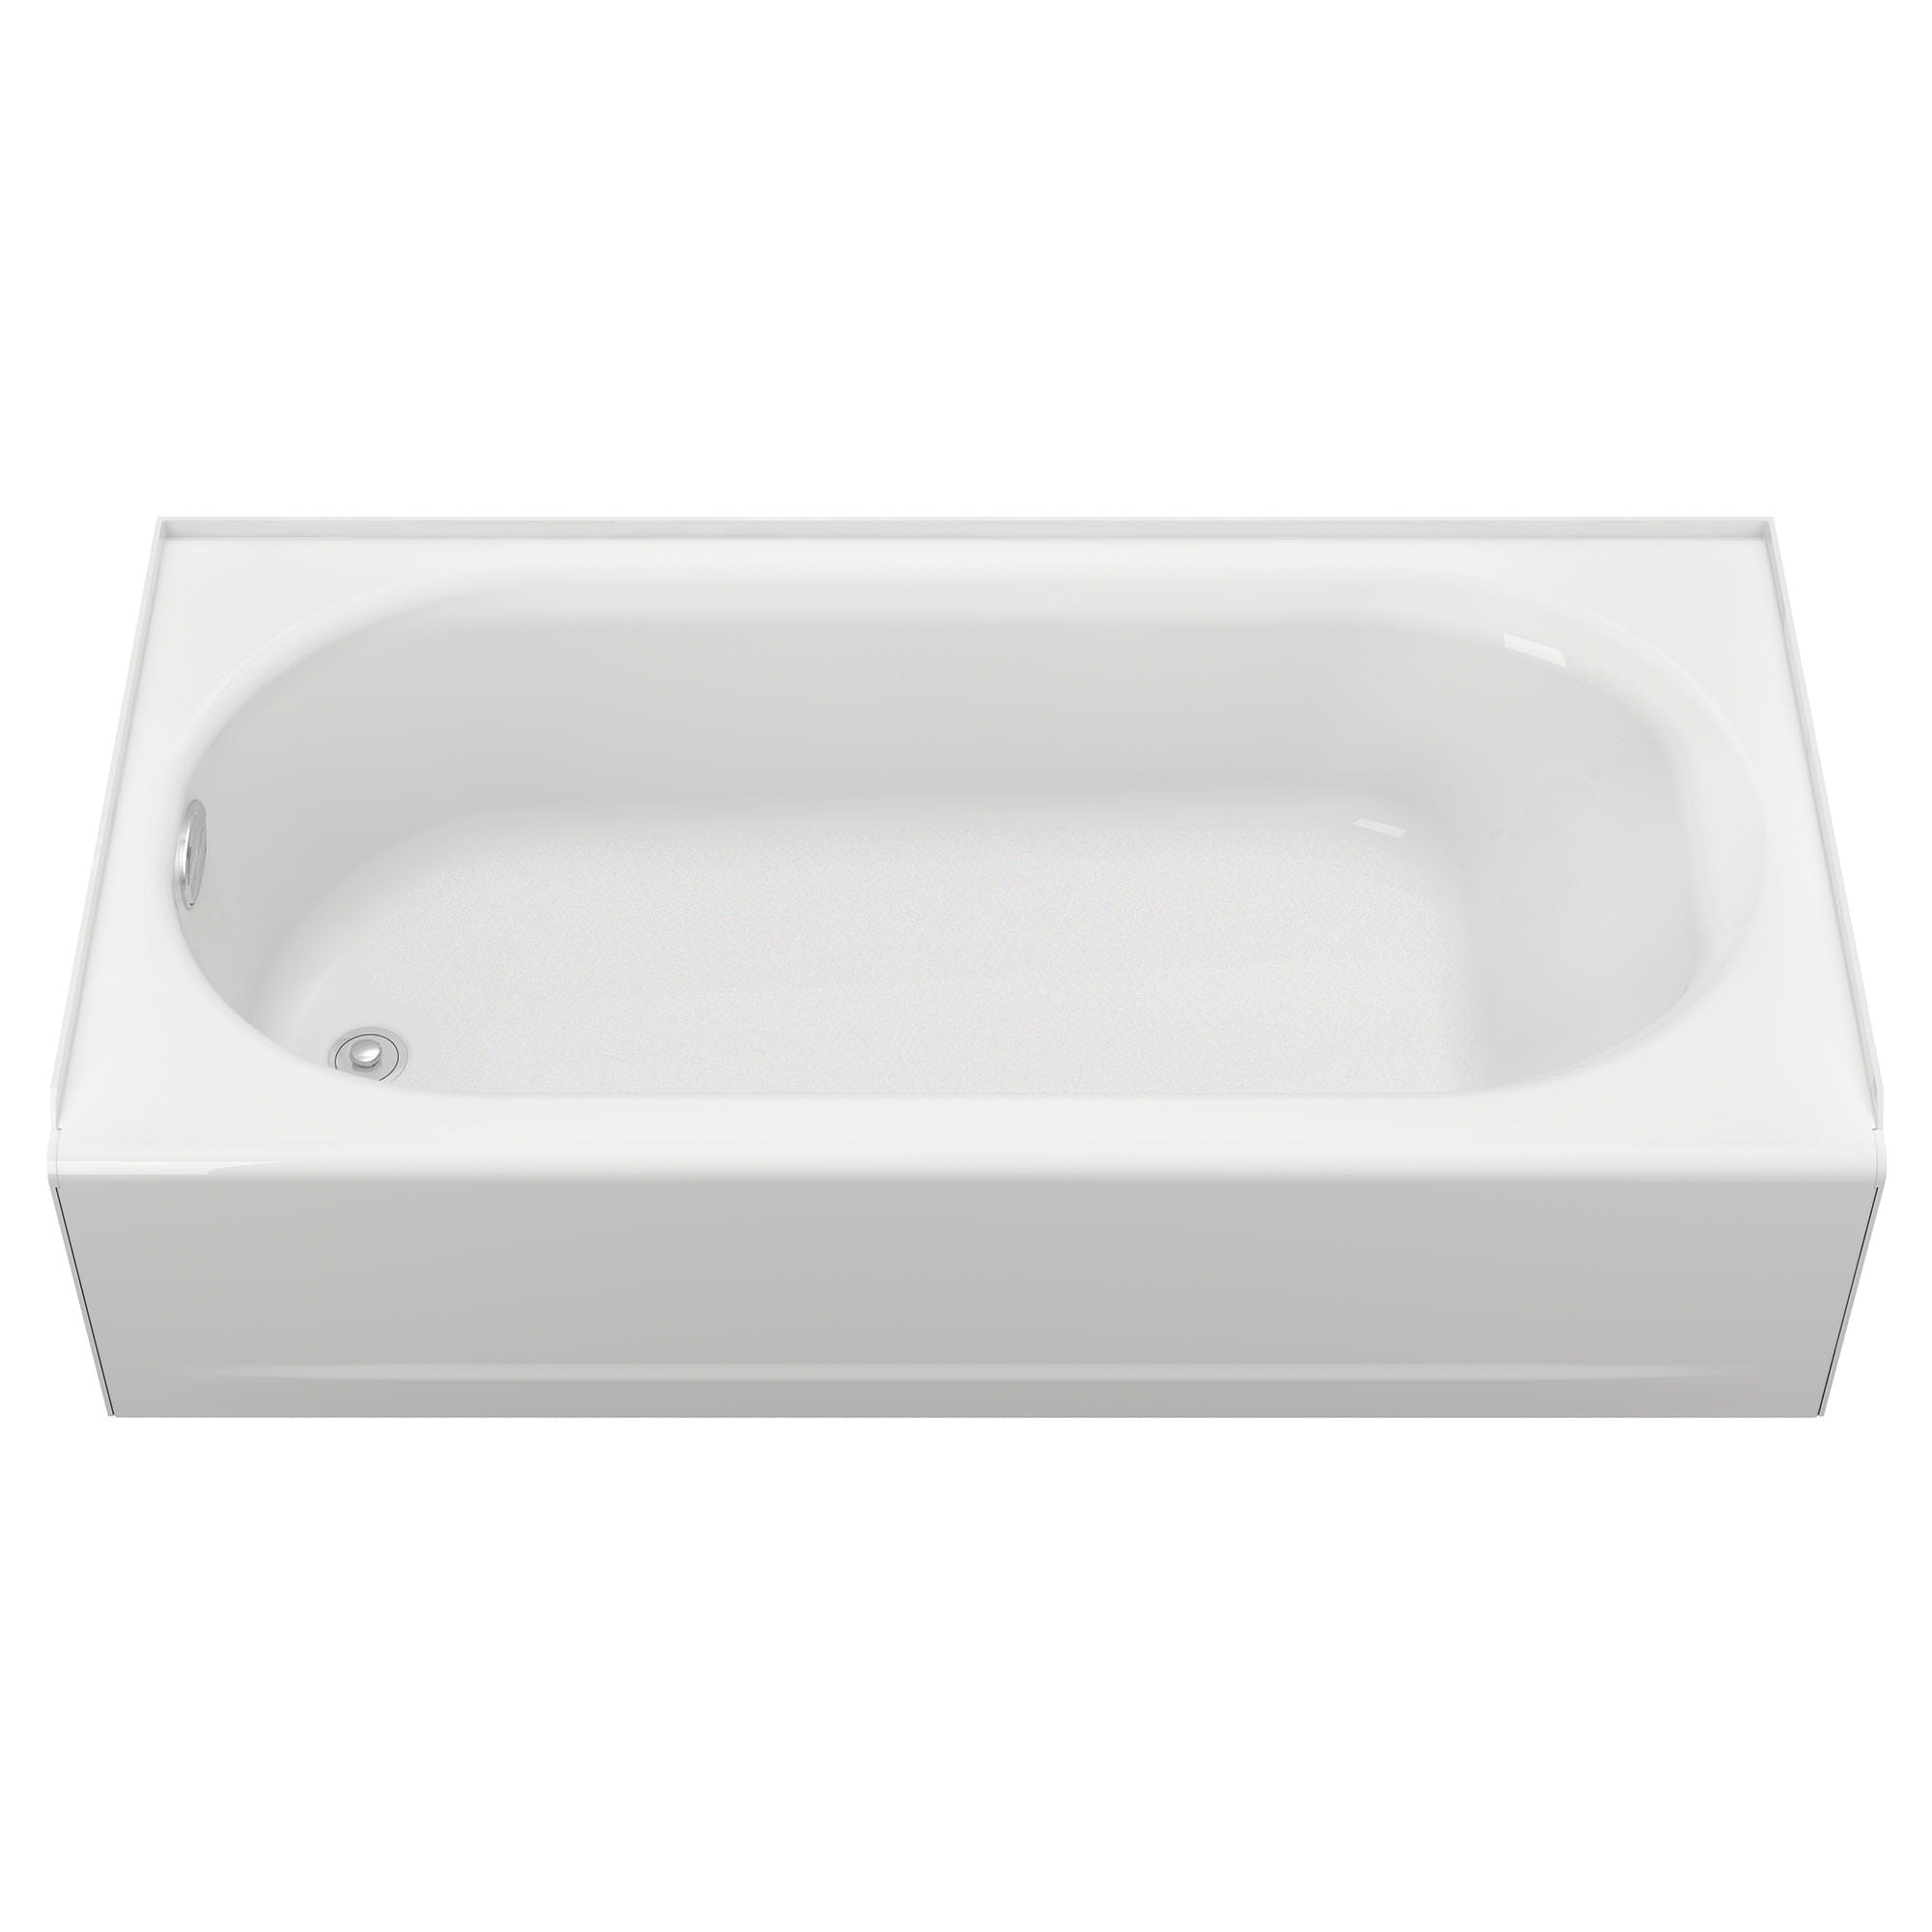 Princeton® Americast® 60 x 30-Inch Integral Apron Bathtub Above Floor Rough Left-Hand Outlet with Integral Drain